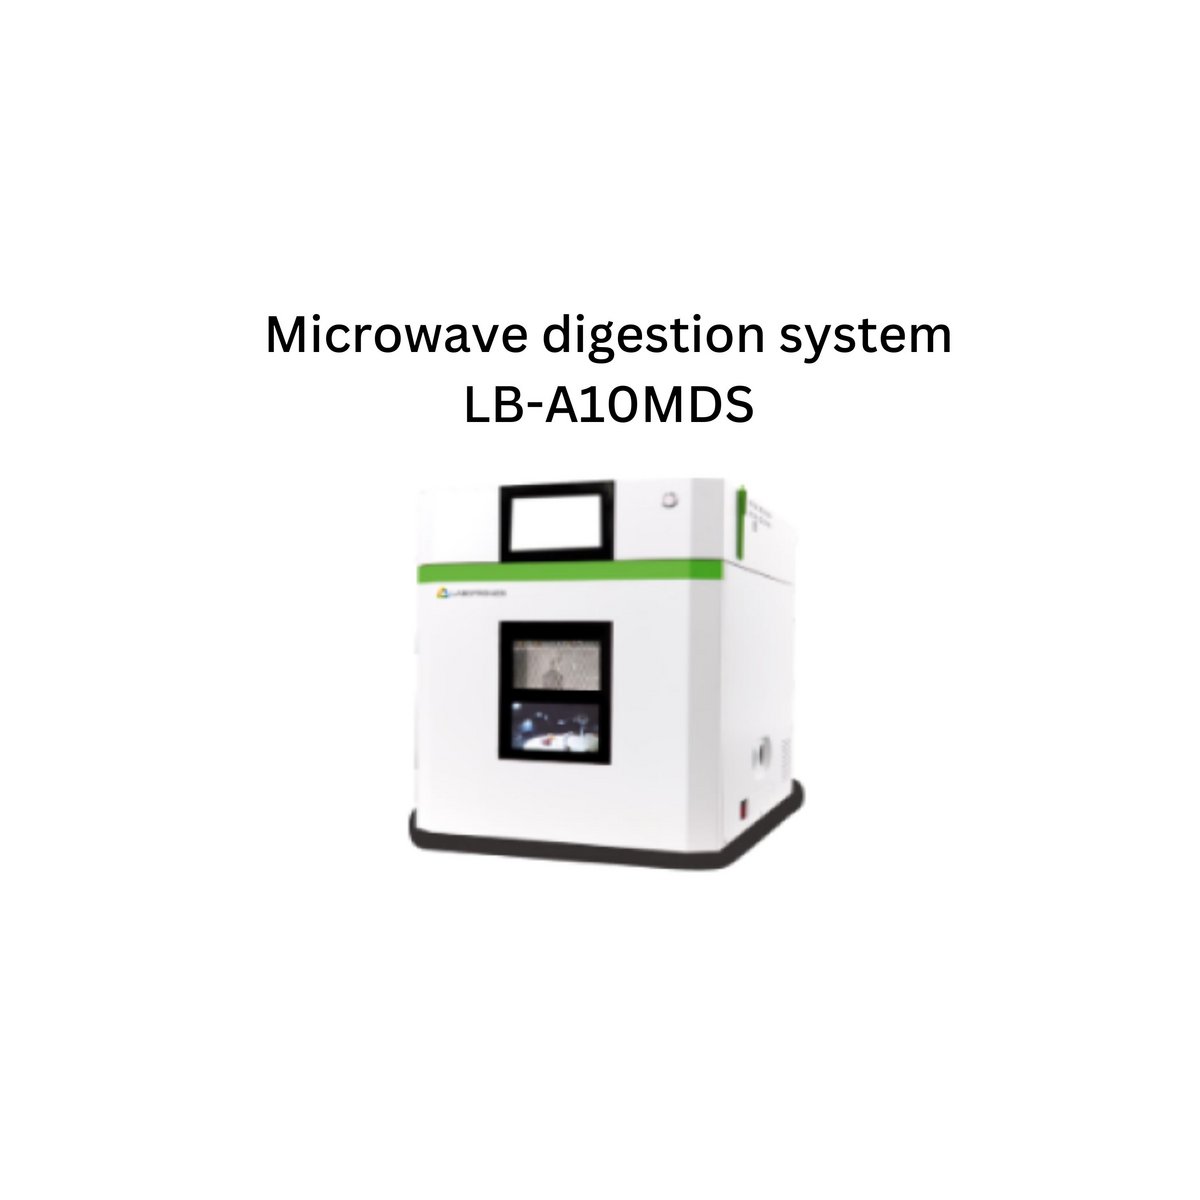 Microwave digestion system LB-A10MDS.jpg